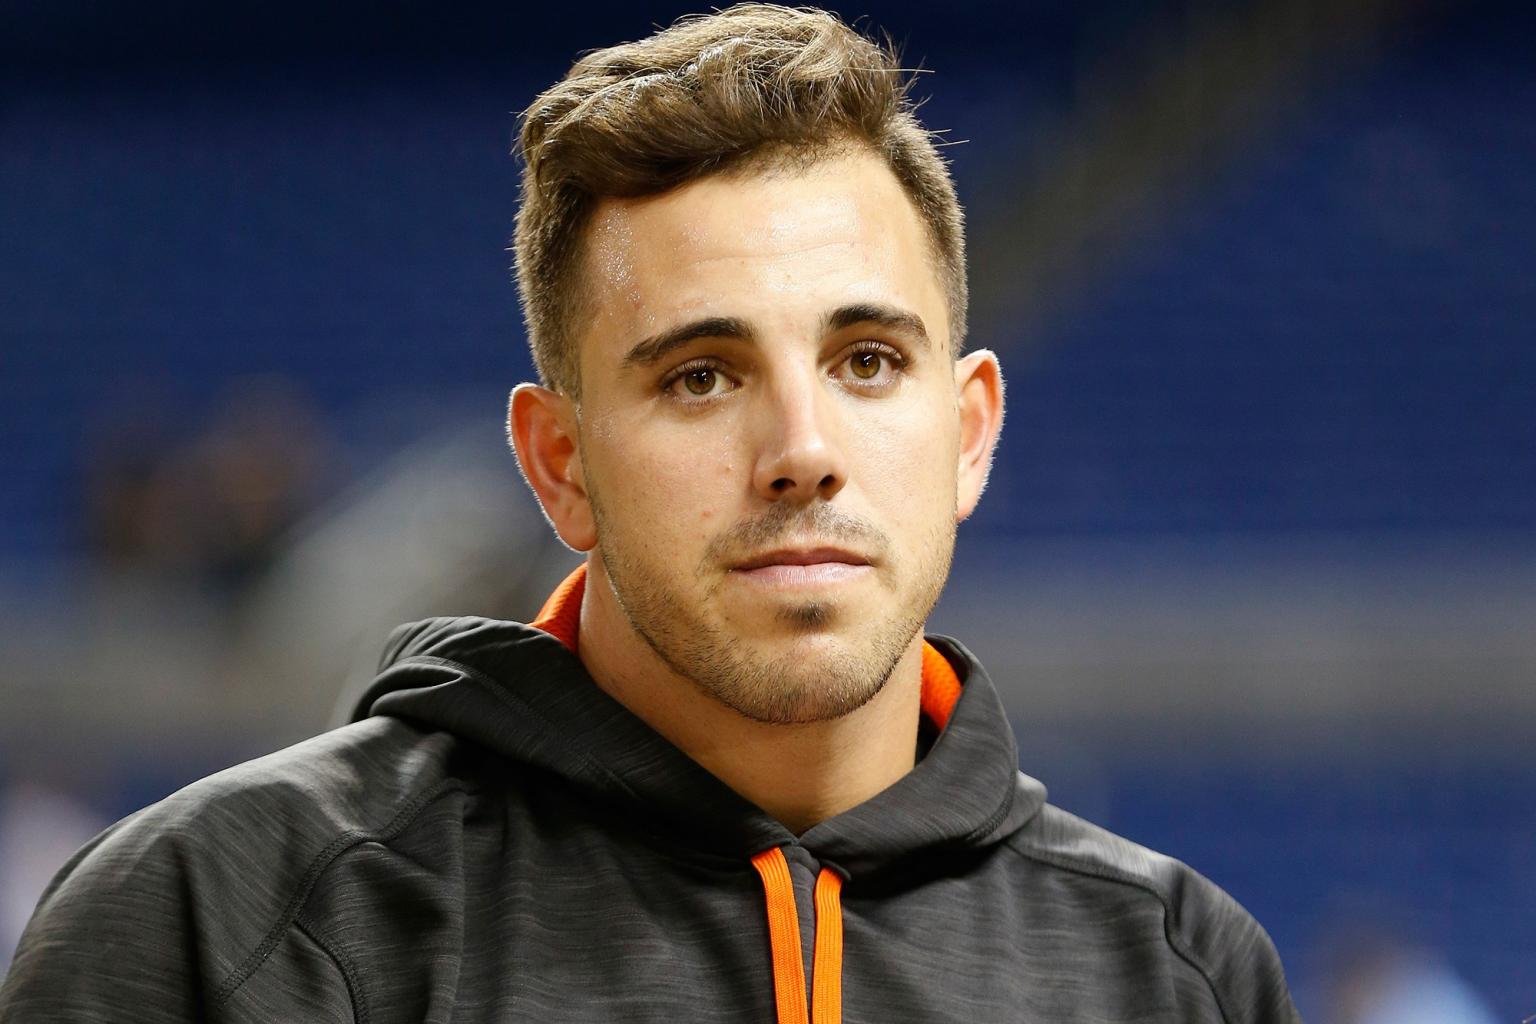 JosÃ© FernÃ¡ndez â€˜Was A Larger Than Life Characterâ€™ Says Producer of New Documentary